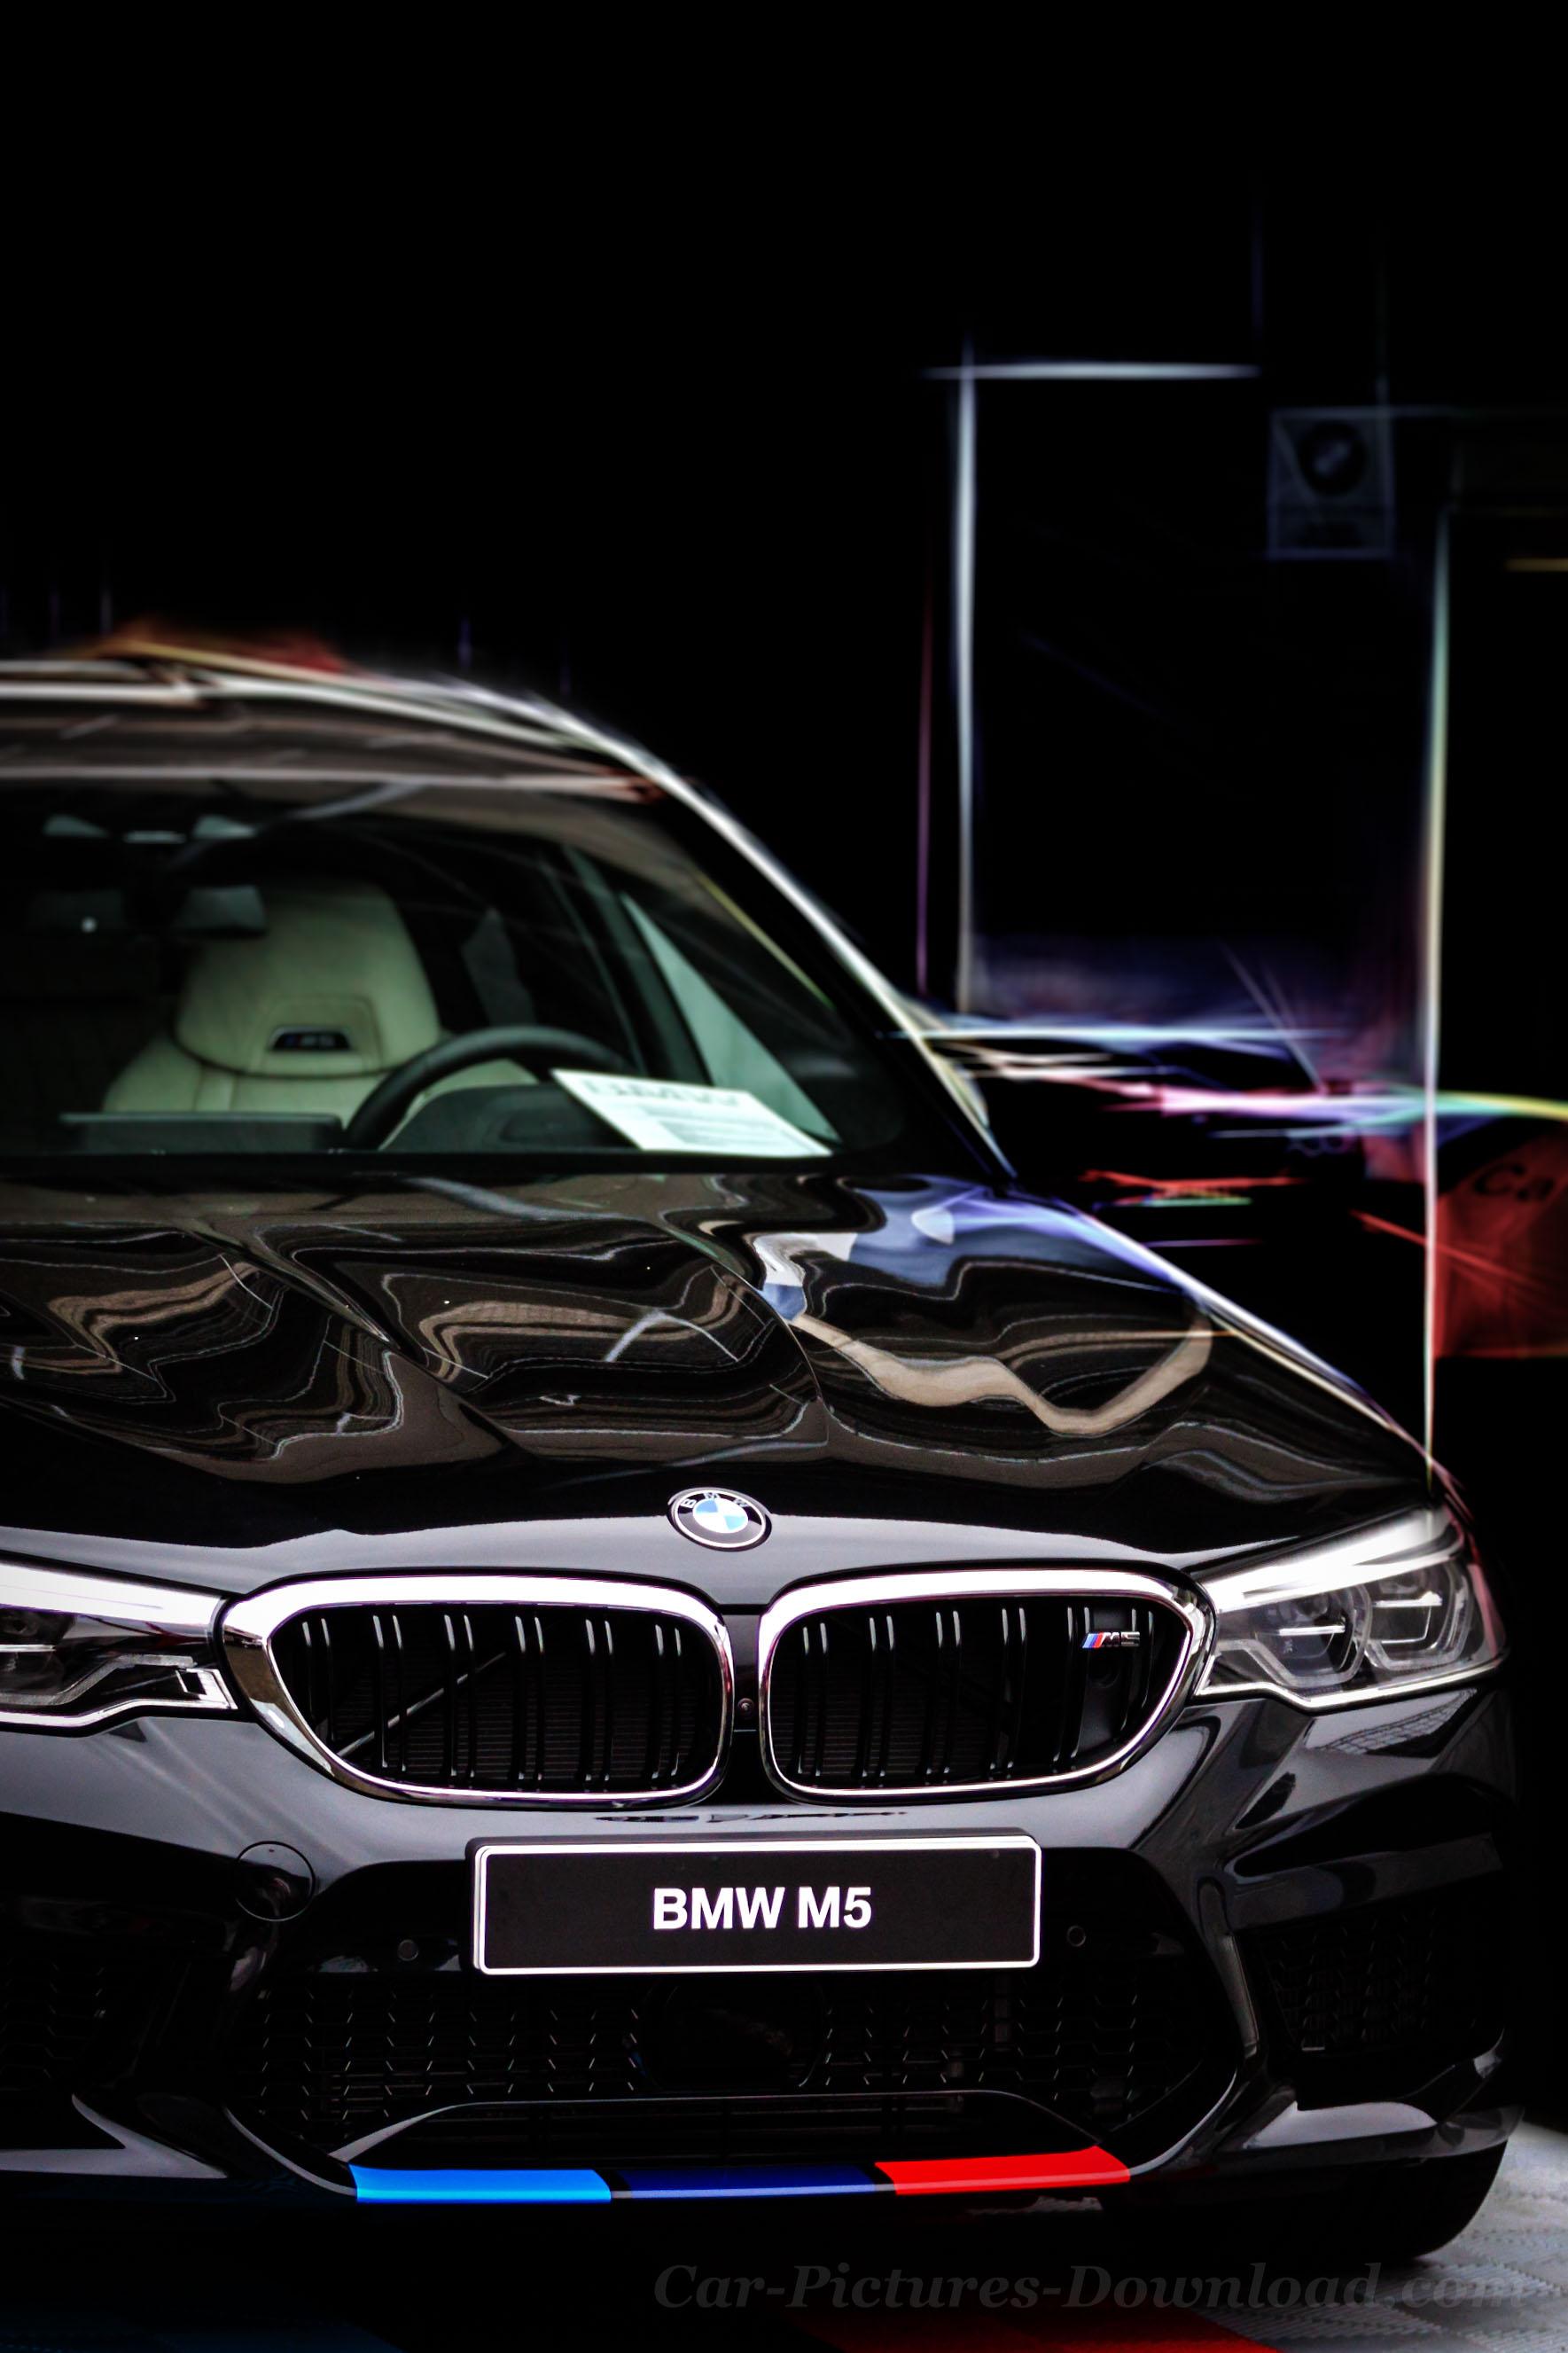 BMW M Wallpaper Picture & Mobile Image Download